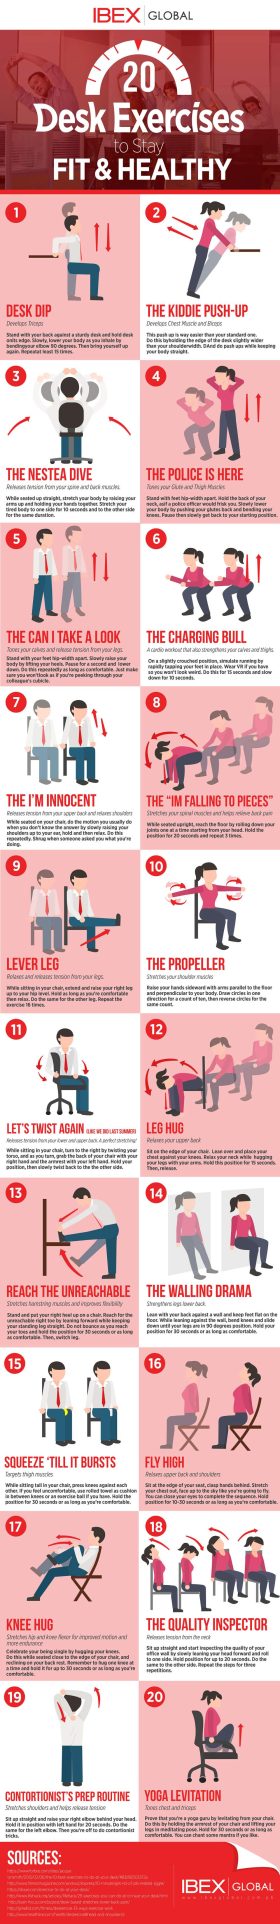 20 Desk Exercises to Stay Fit & Healthy